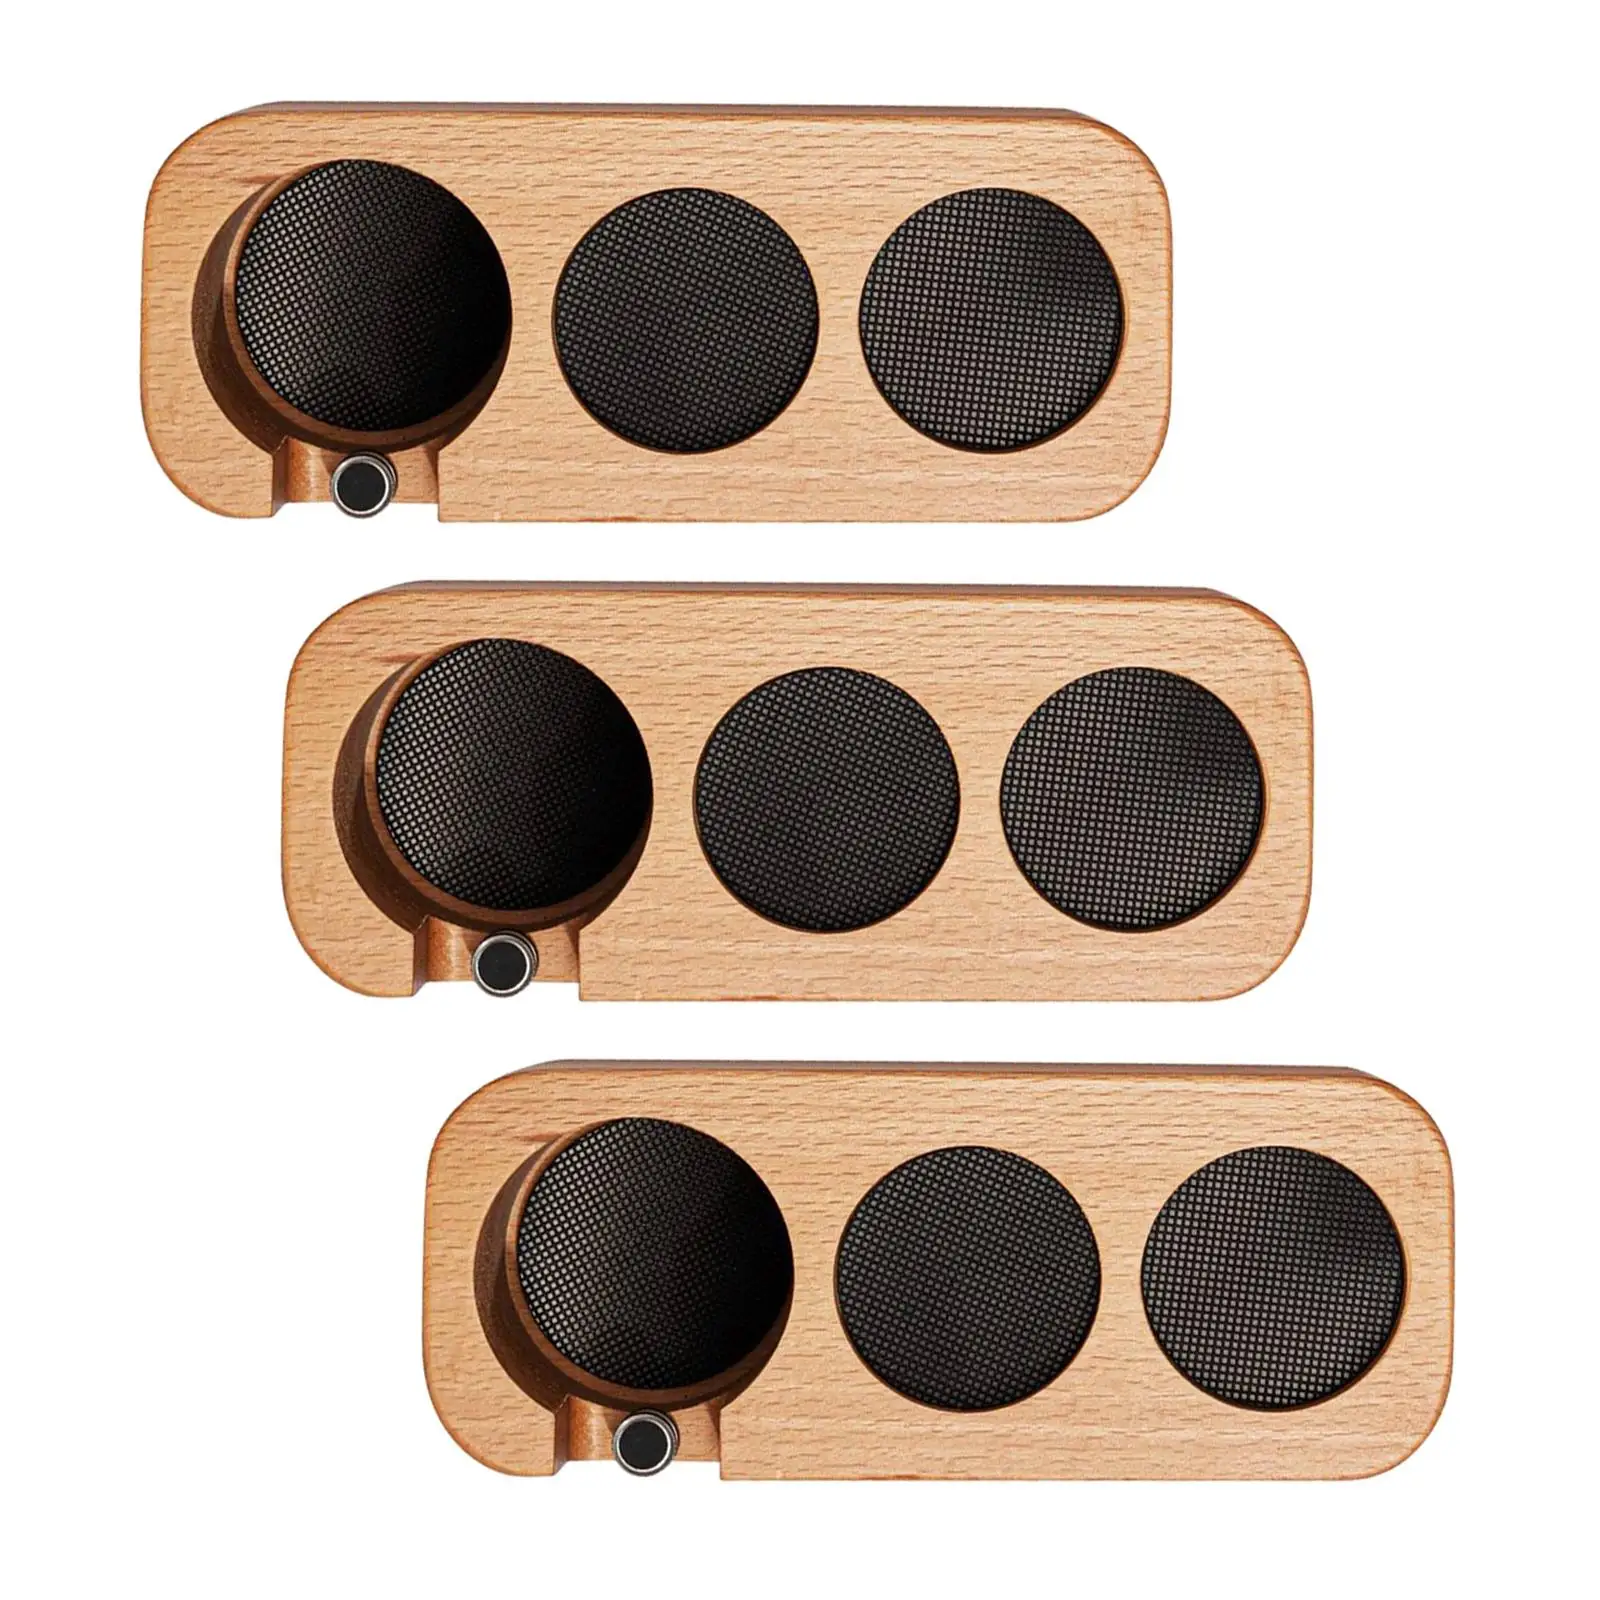 Wooden Coffee Filter Tamper Holder Wood Coffee Distributors Stand with 3 Holes